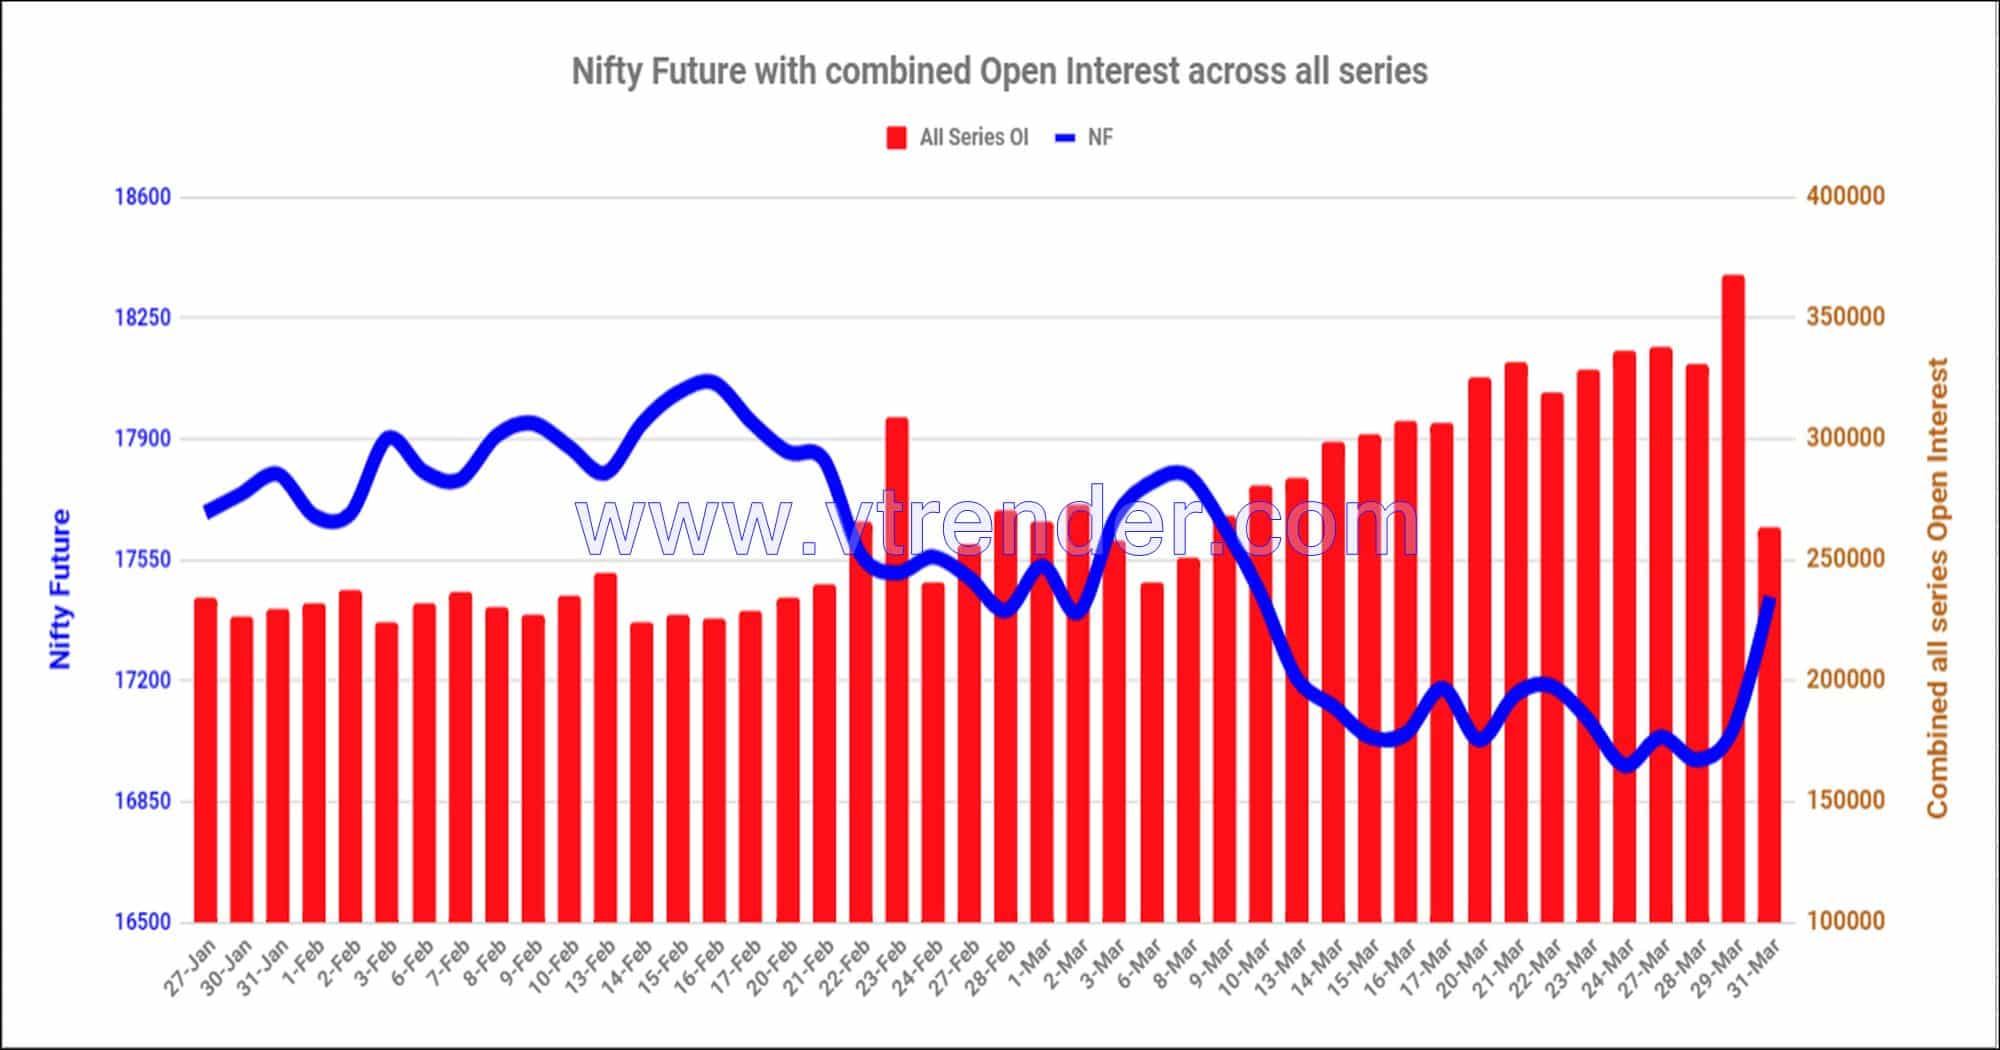 Nf31Mar Nifty And Banknifty Futures With All Series Combined Open Interest – 31St Mar 2023 Banknifty, Nifty, Open Interest